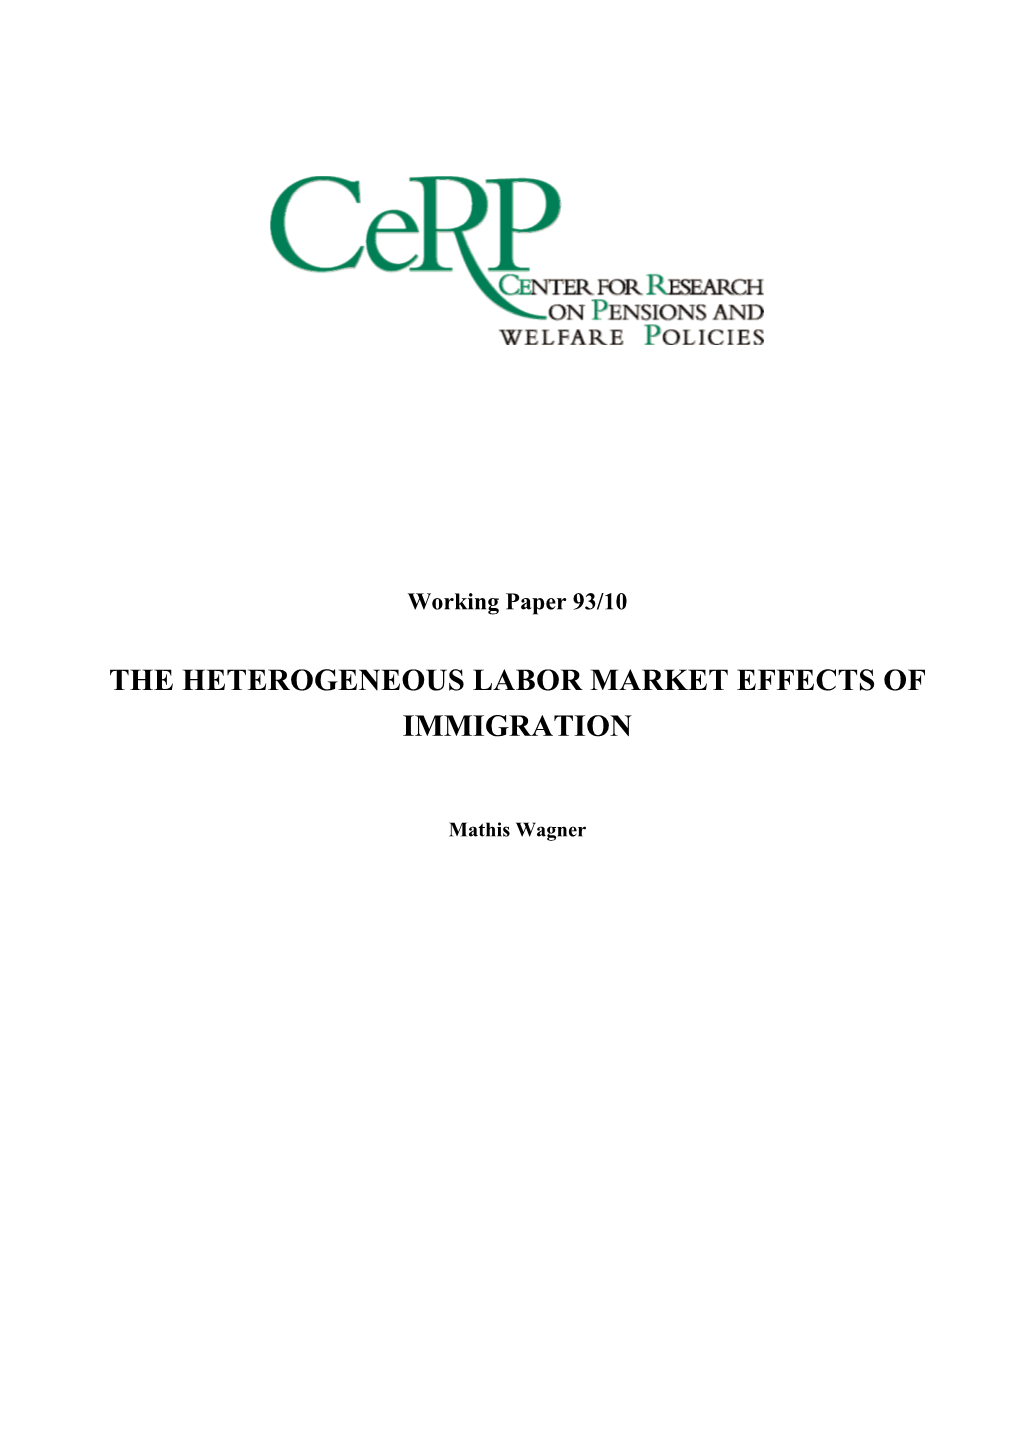 The Heterogeneous Labor Market Effects of Immigration